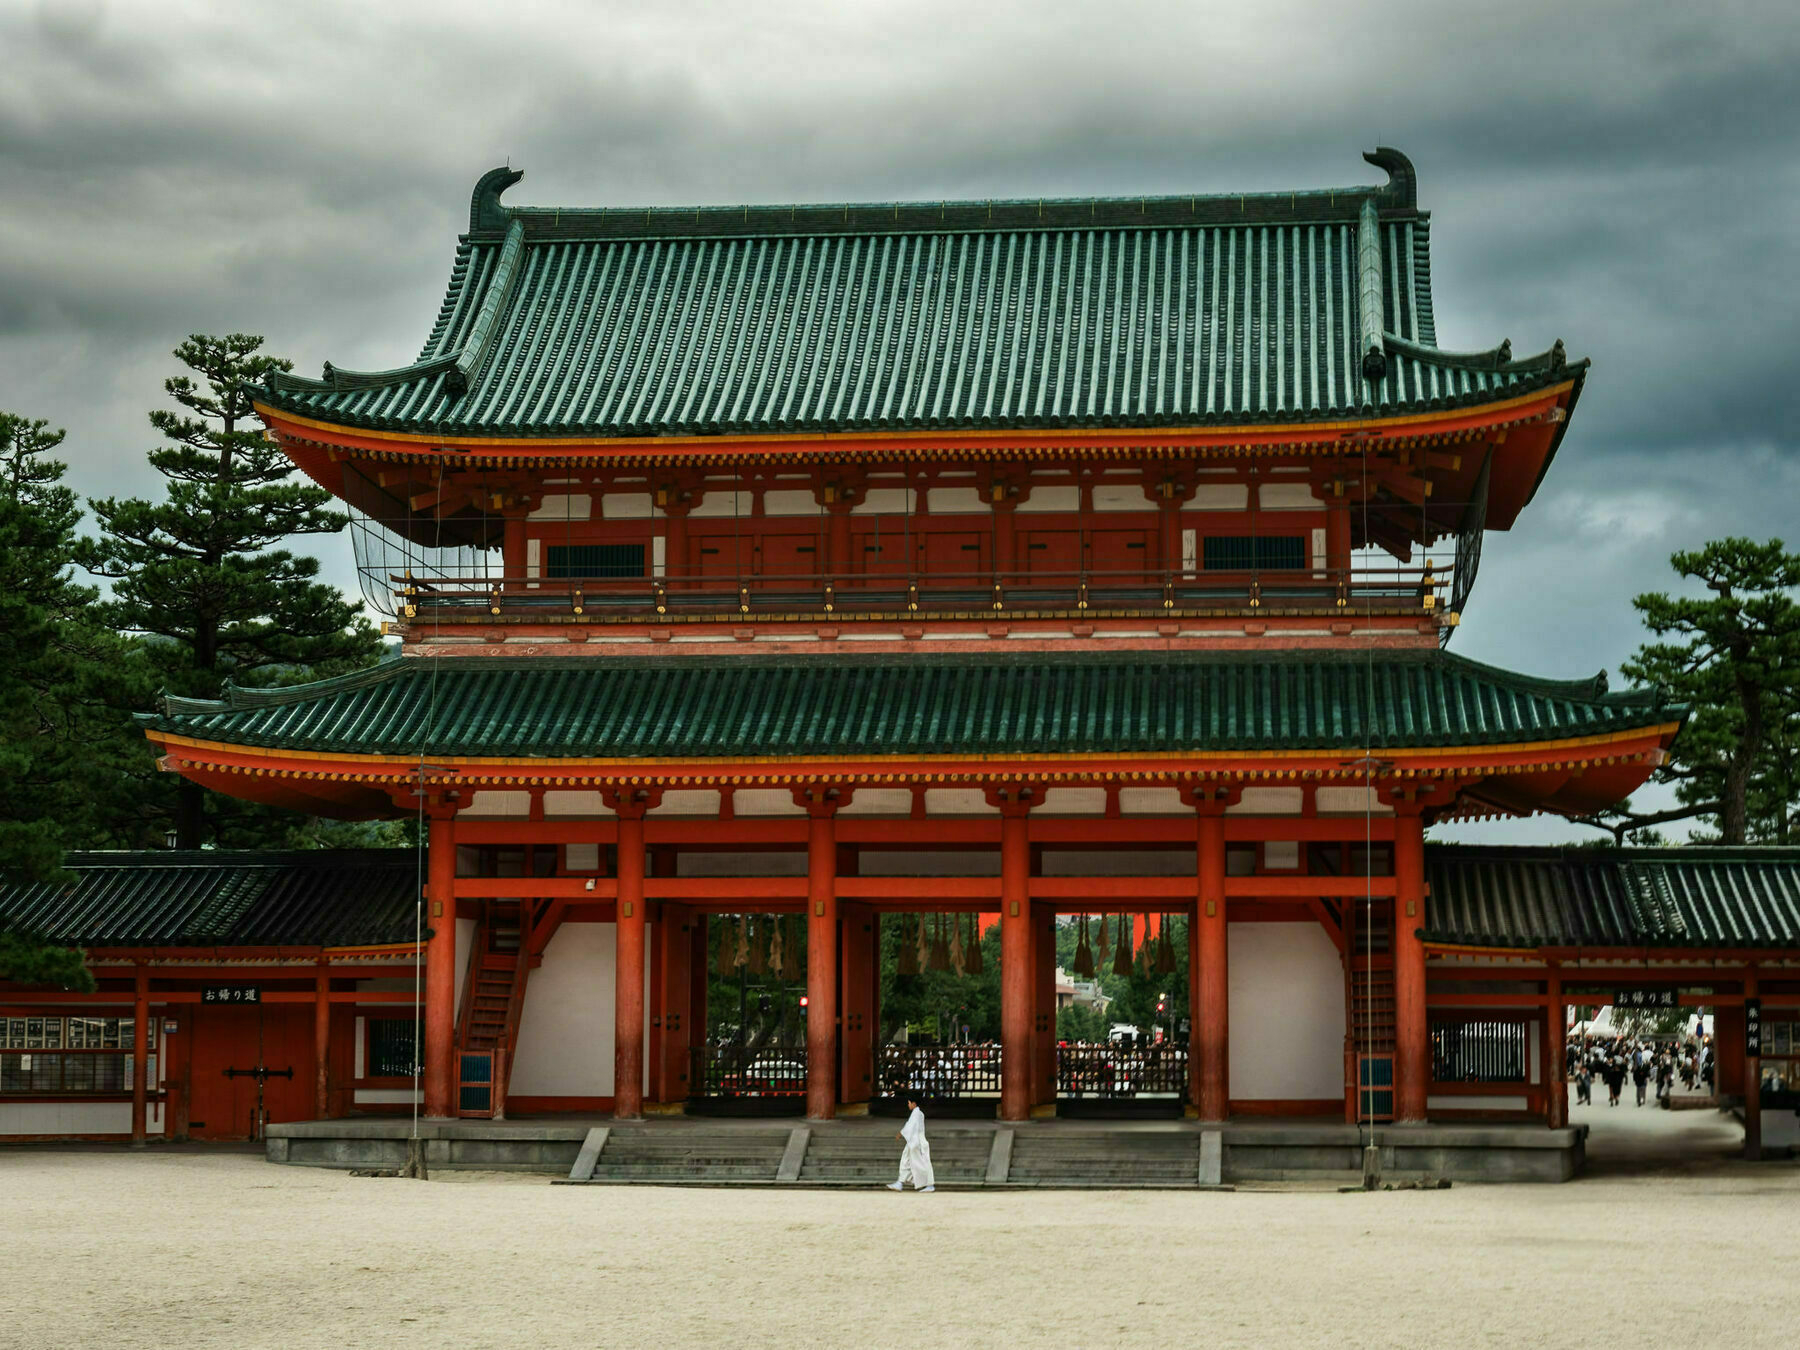 Photo of Kyoto's Heian Jingu shrine, modified using Adobe Generative Remove to eliminate distracting elements in the foreground.